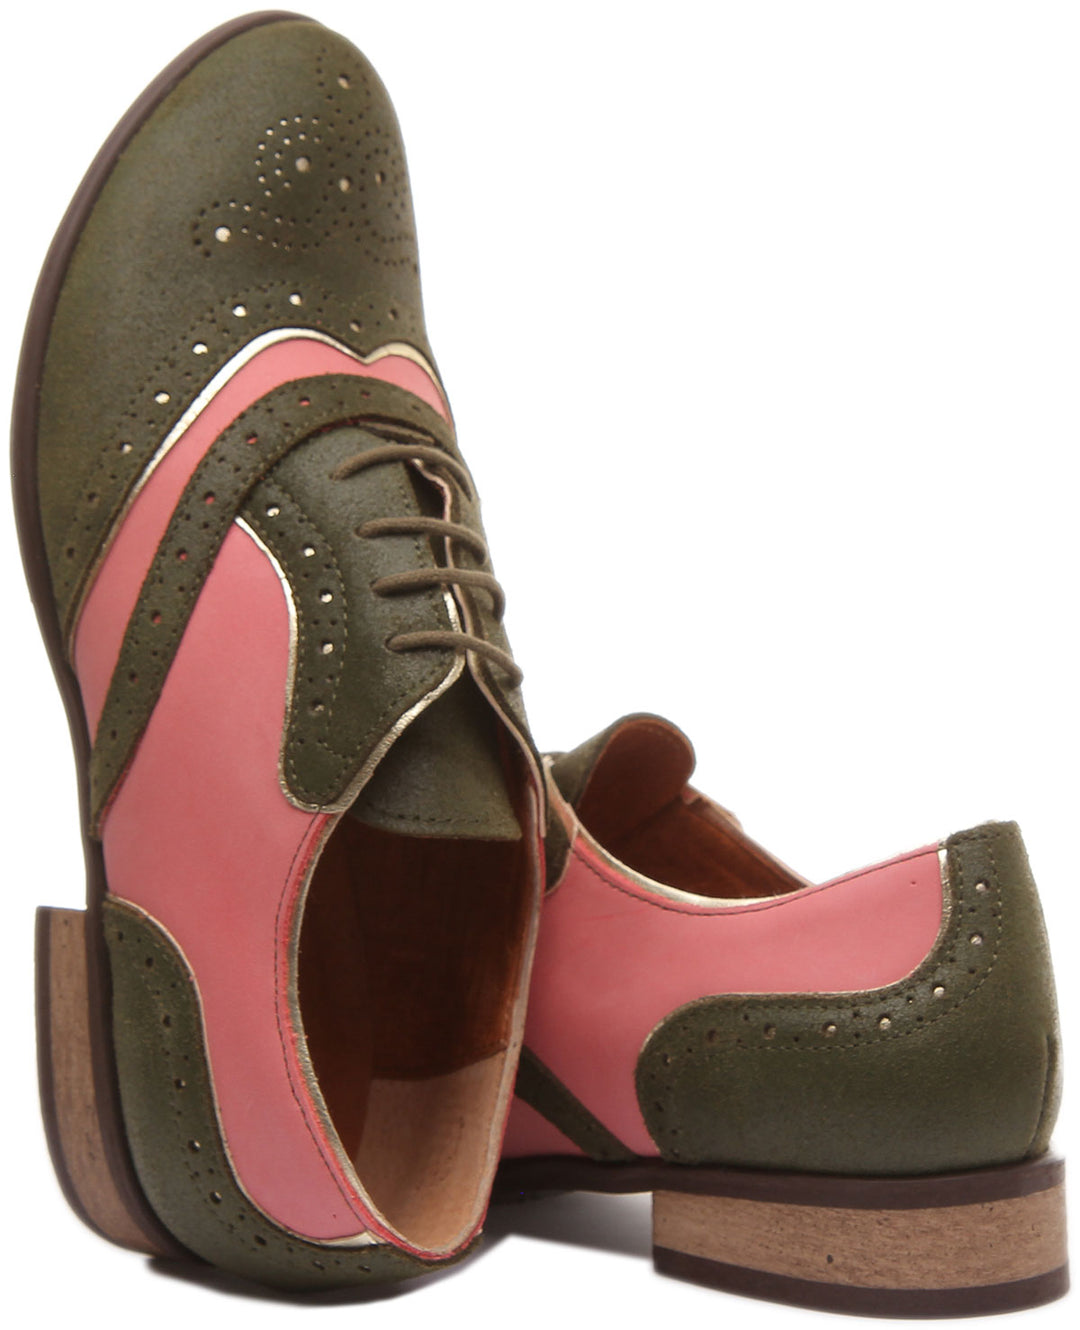 JUSTINREESS ENGLAND Womens Shoes Roxana Lace up Soft Leather Brogue Shoes in Green